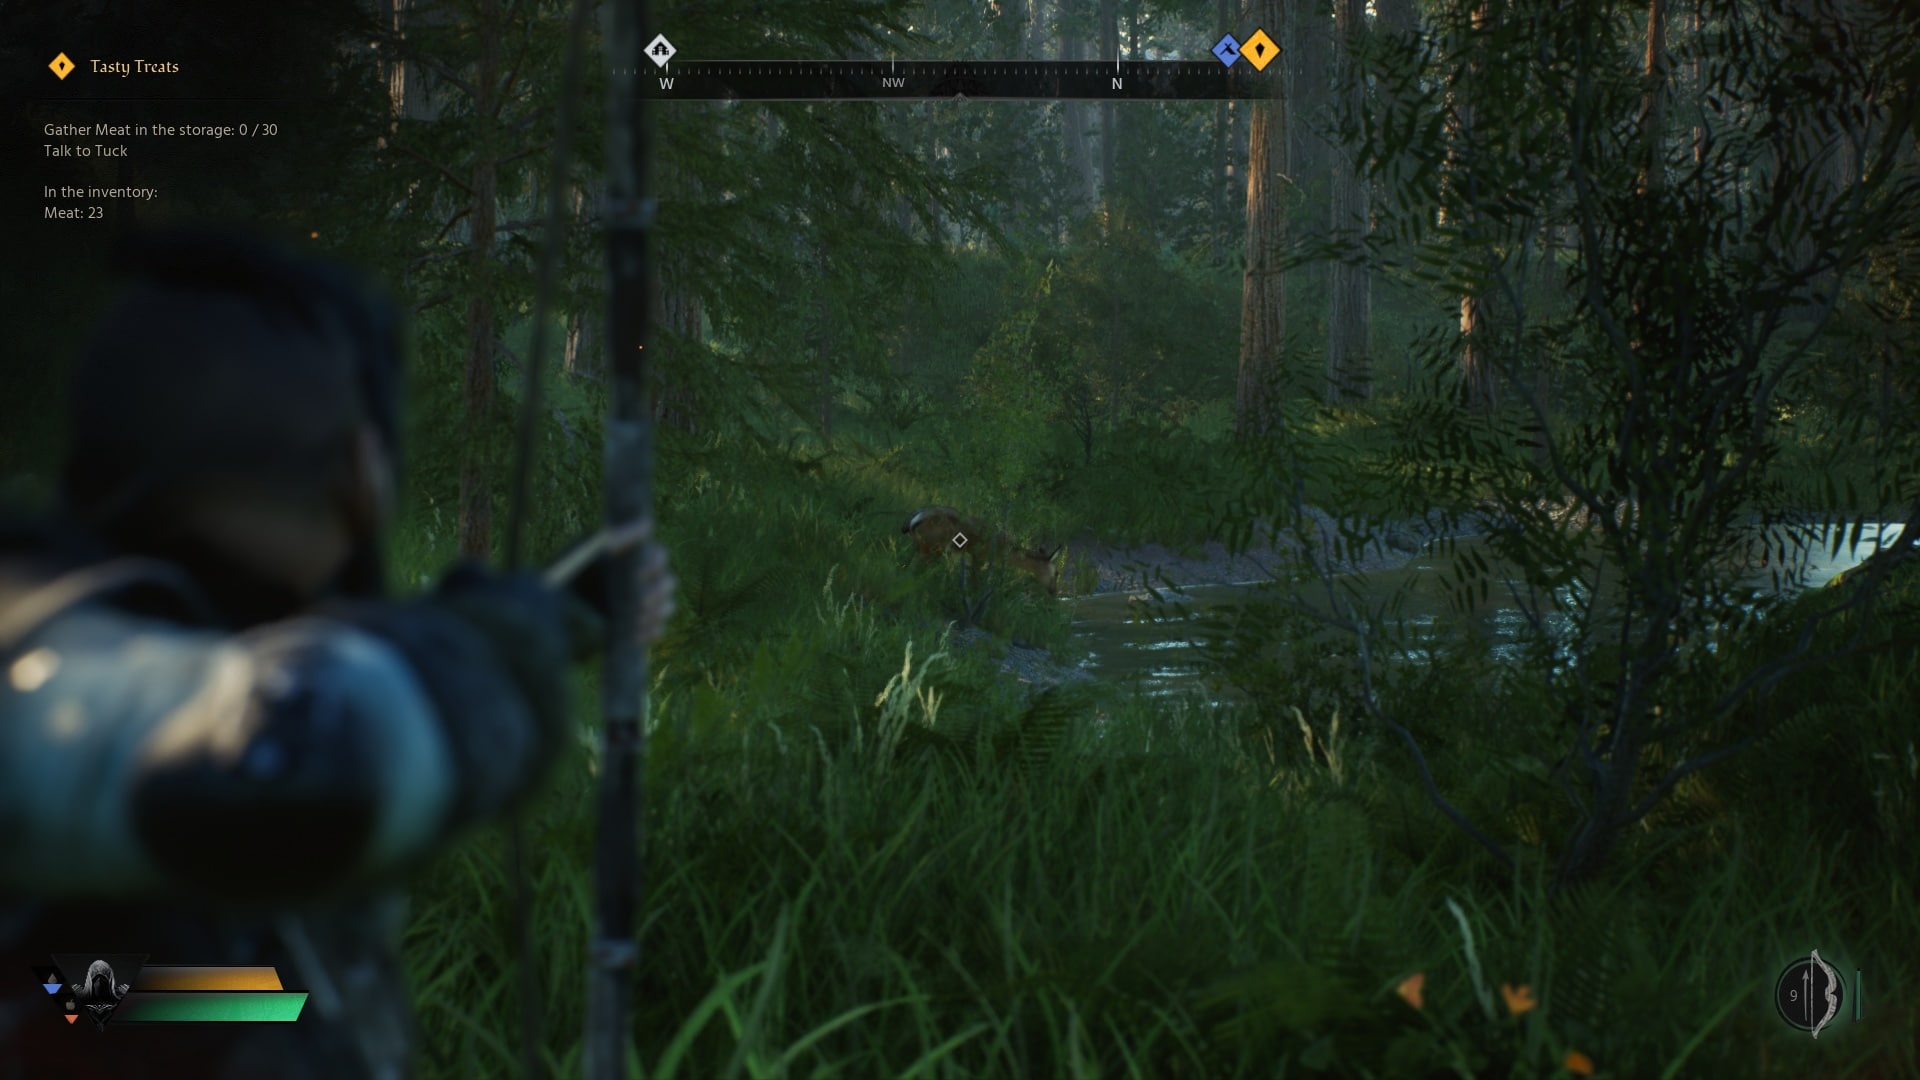 We can't always sneak up on deer so peacefully. Shooting moving targets works well, though.